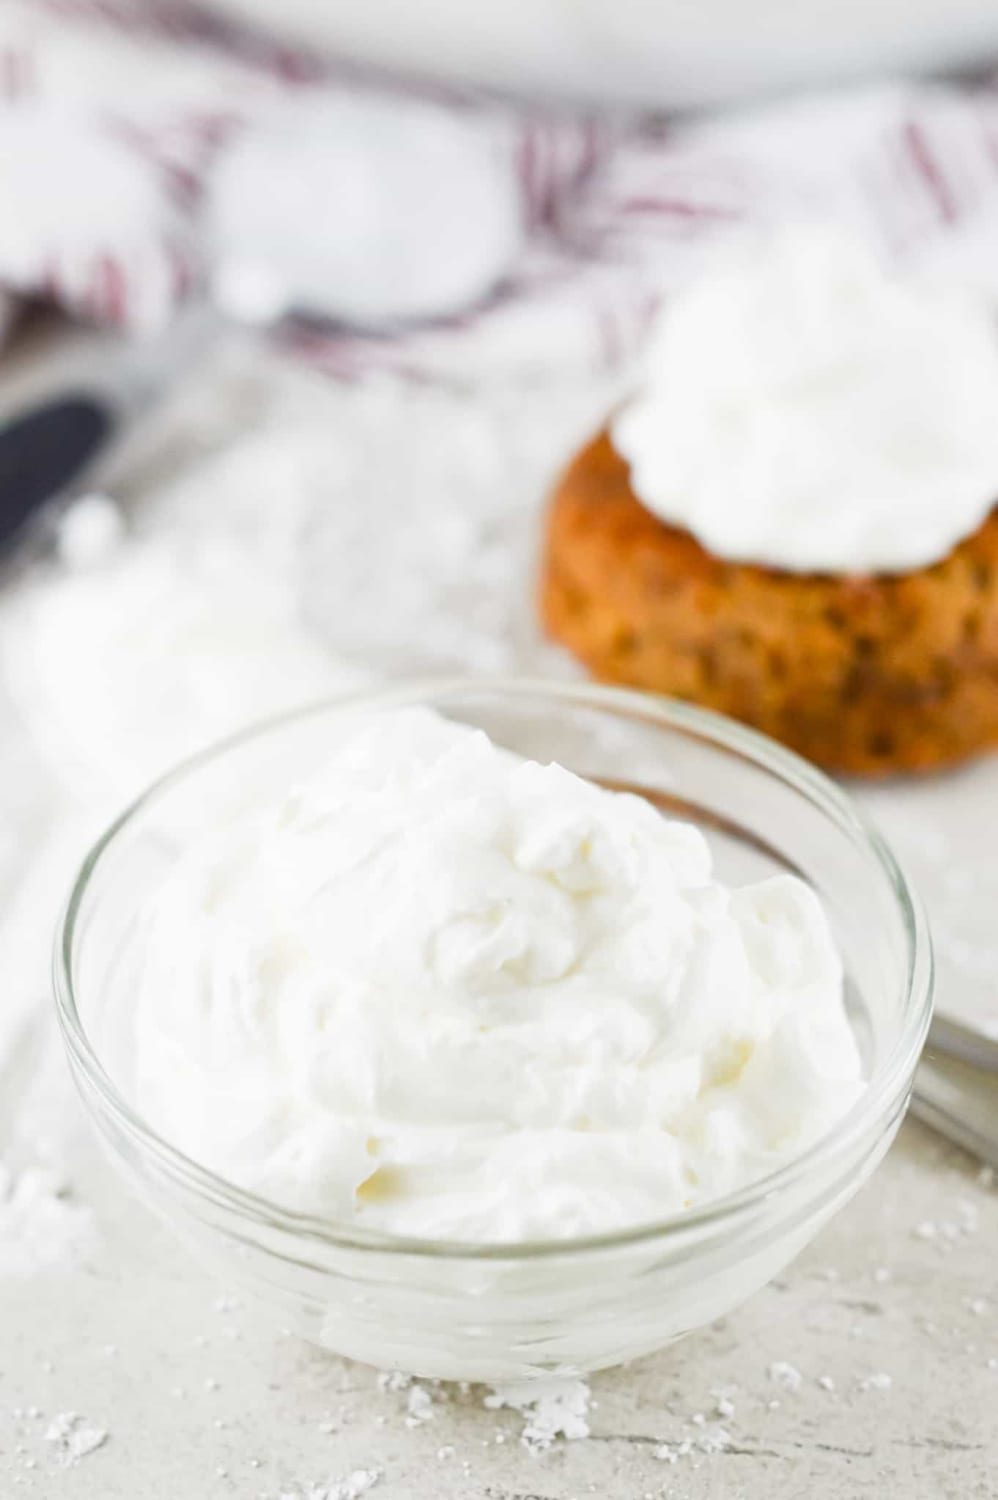 Keto Whipped Cream is the Perfect Pie Topping